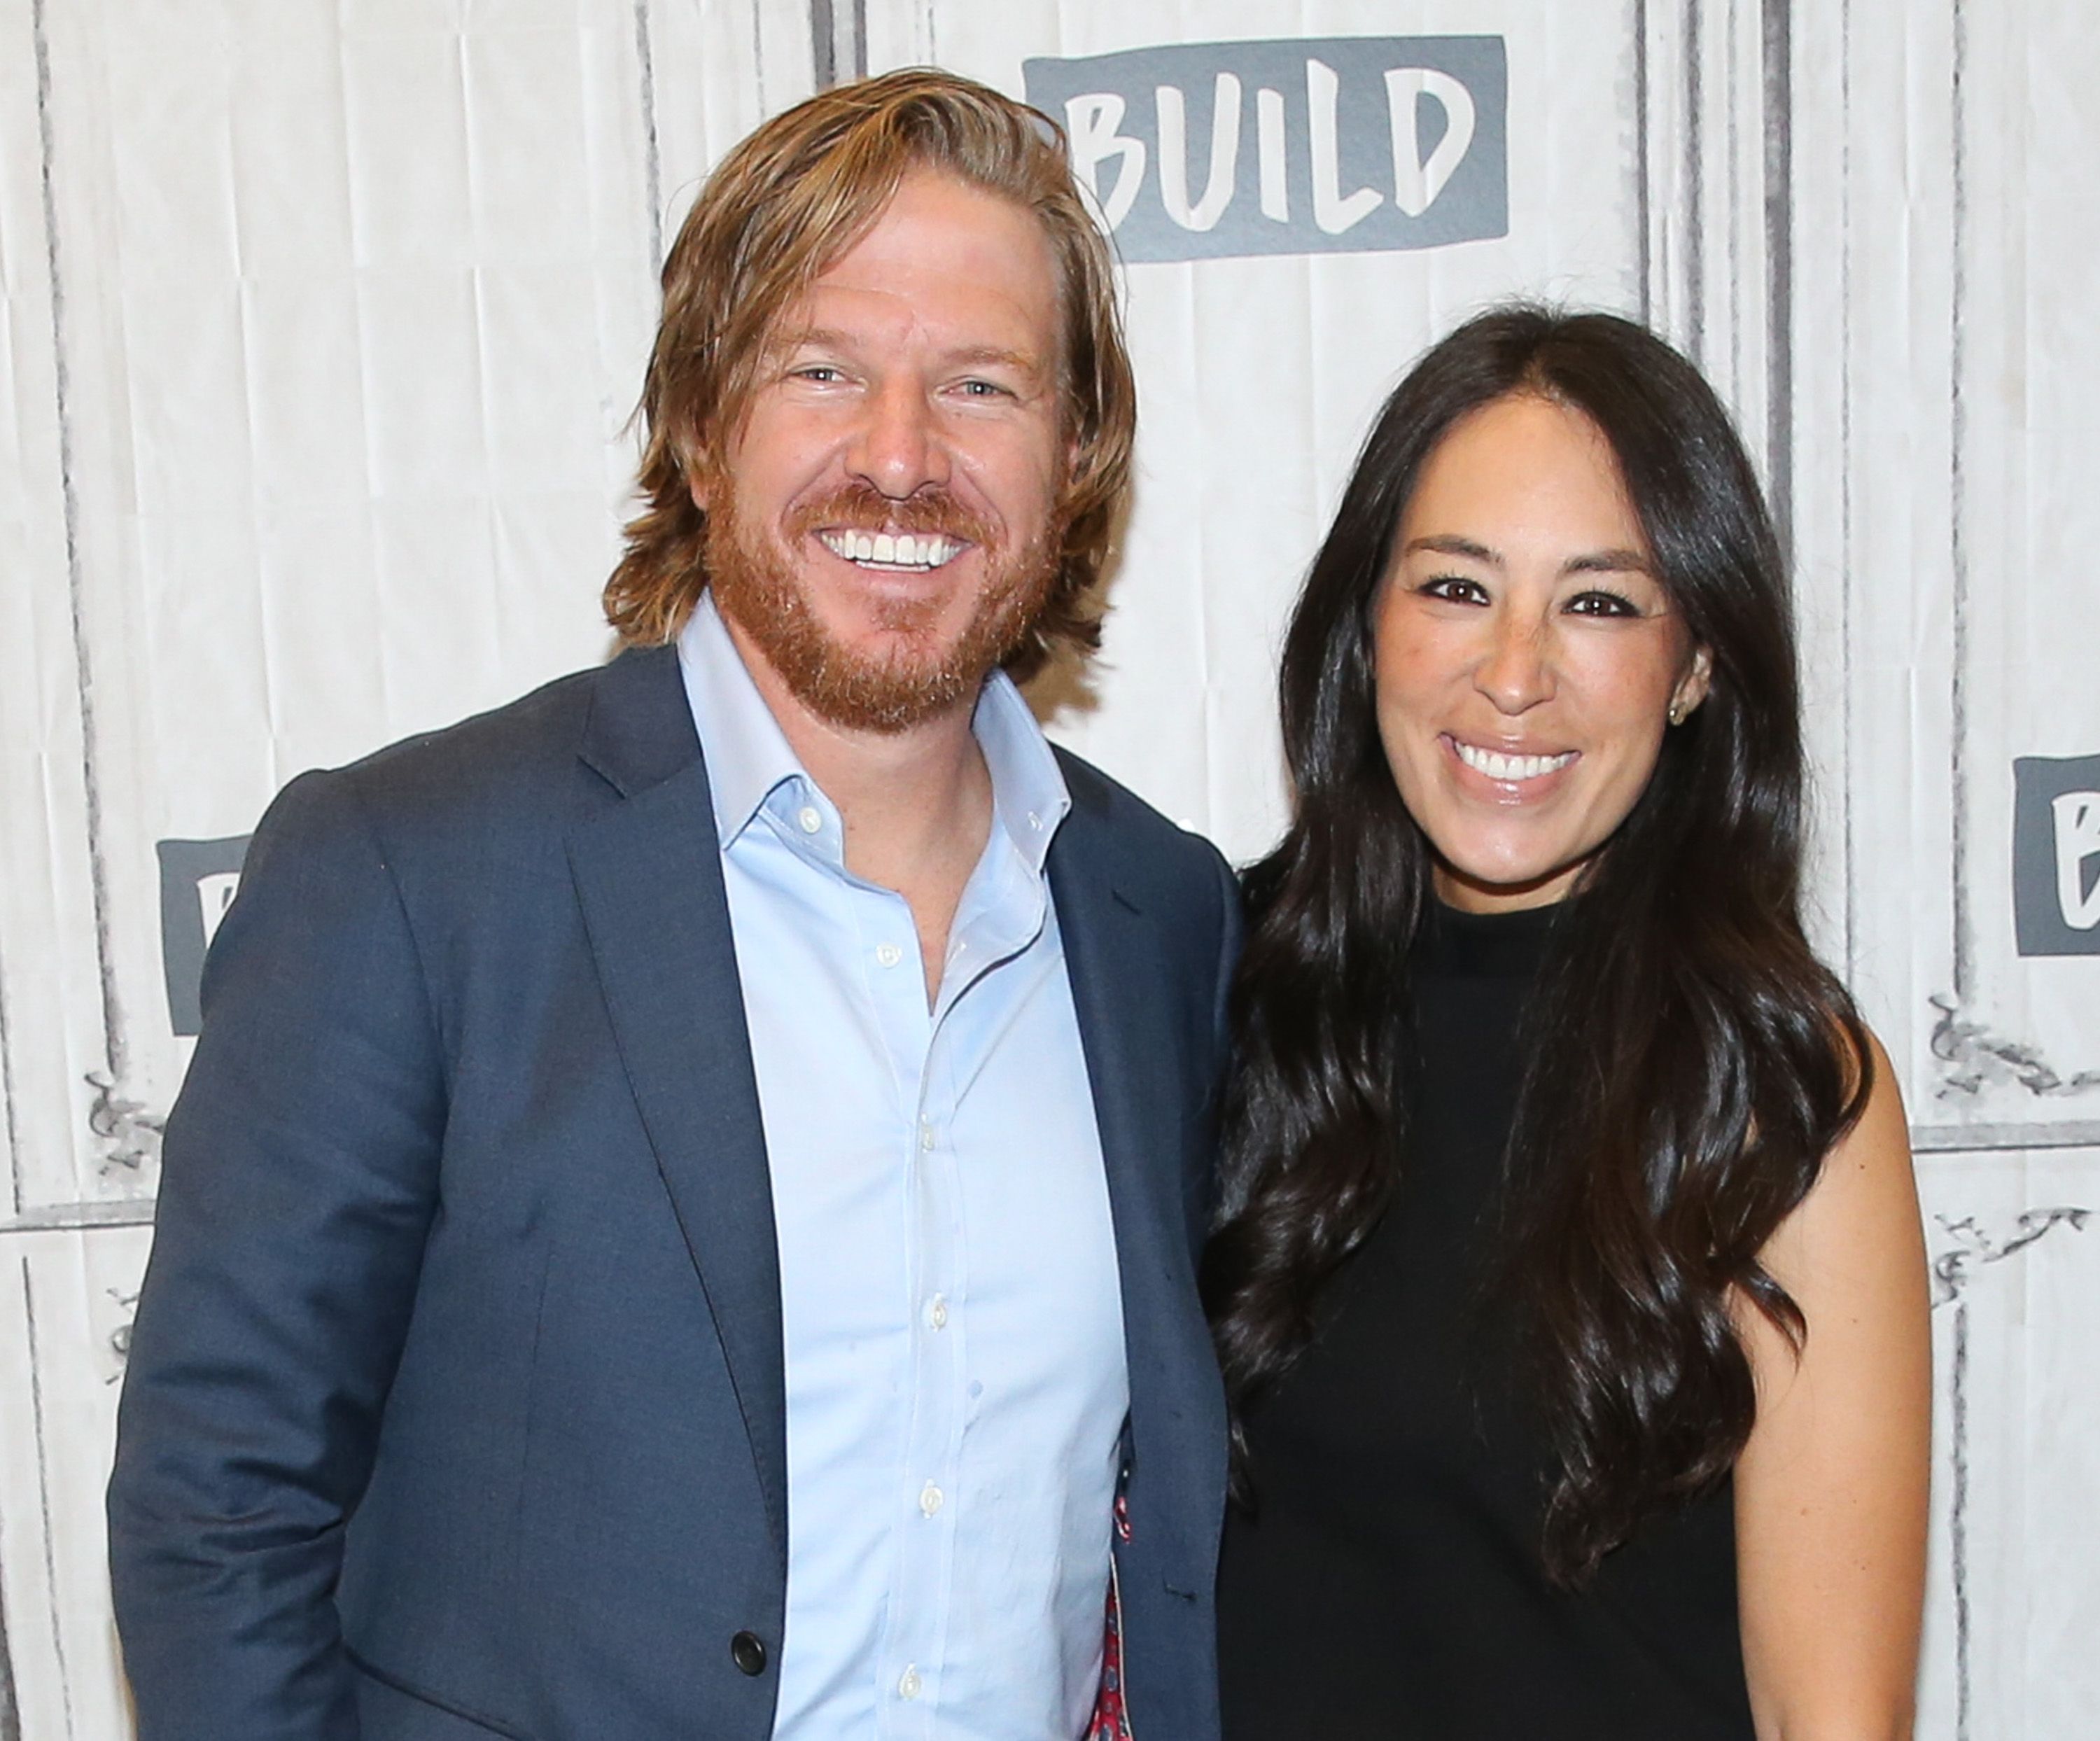 Chip Gaines and Joanna Gaines attend the Build Series at Build Studio on October 18, 2017 in New York City. | Photo: Getty Images